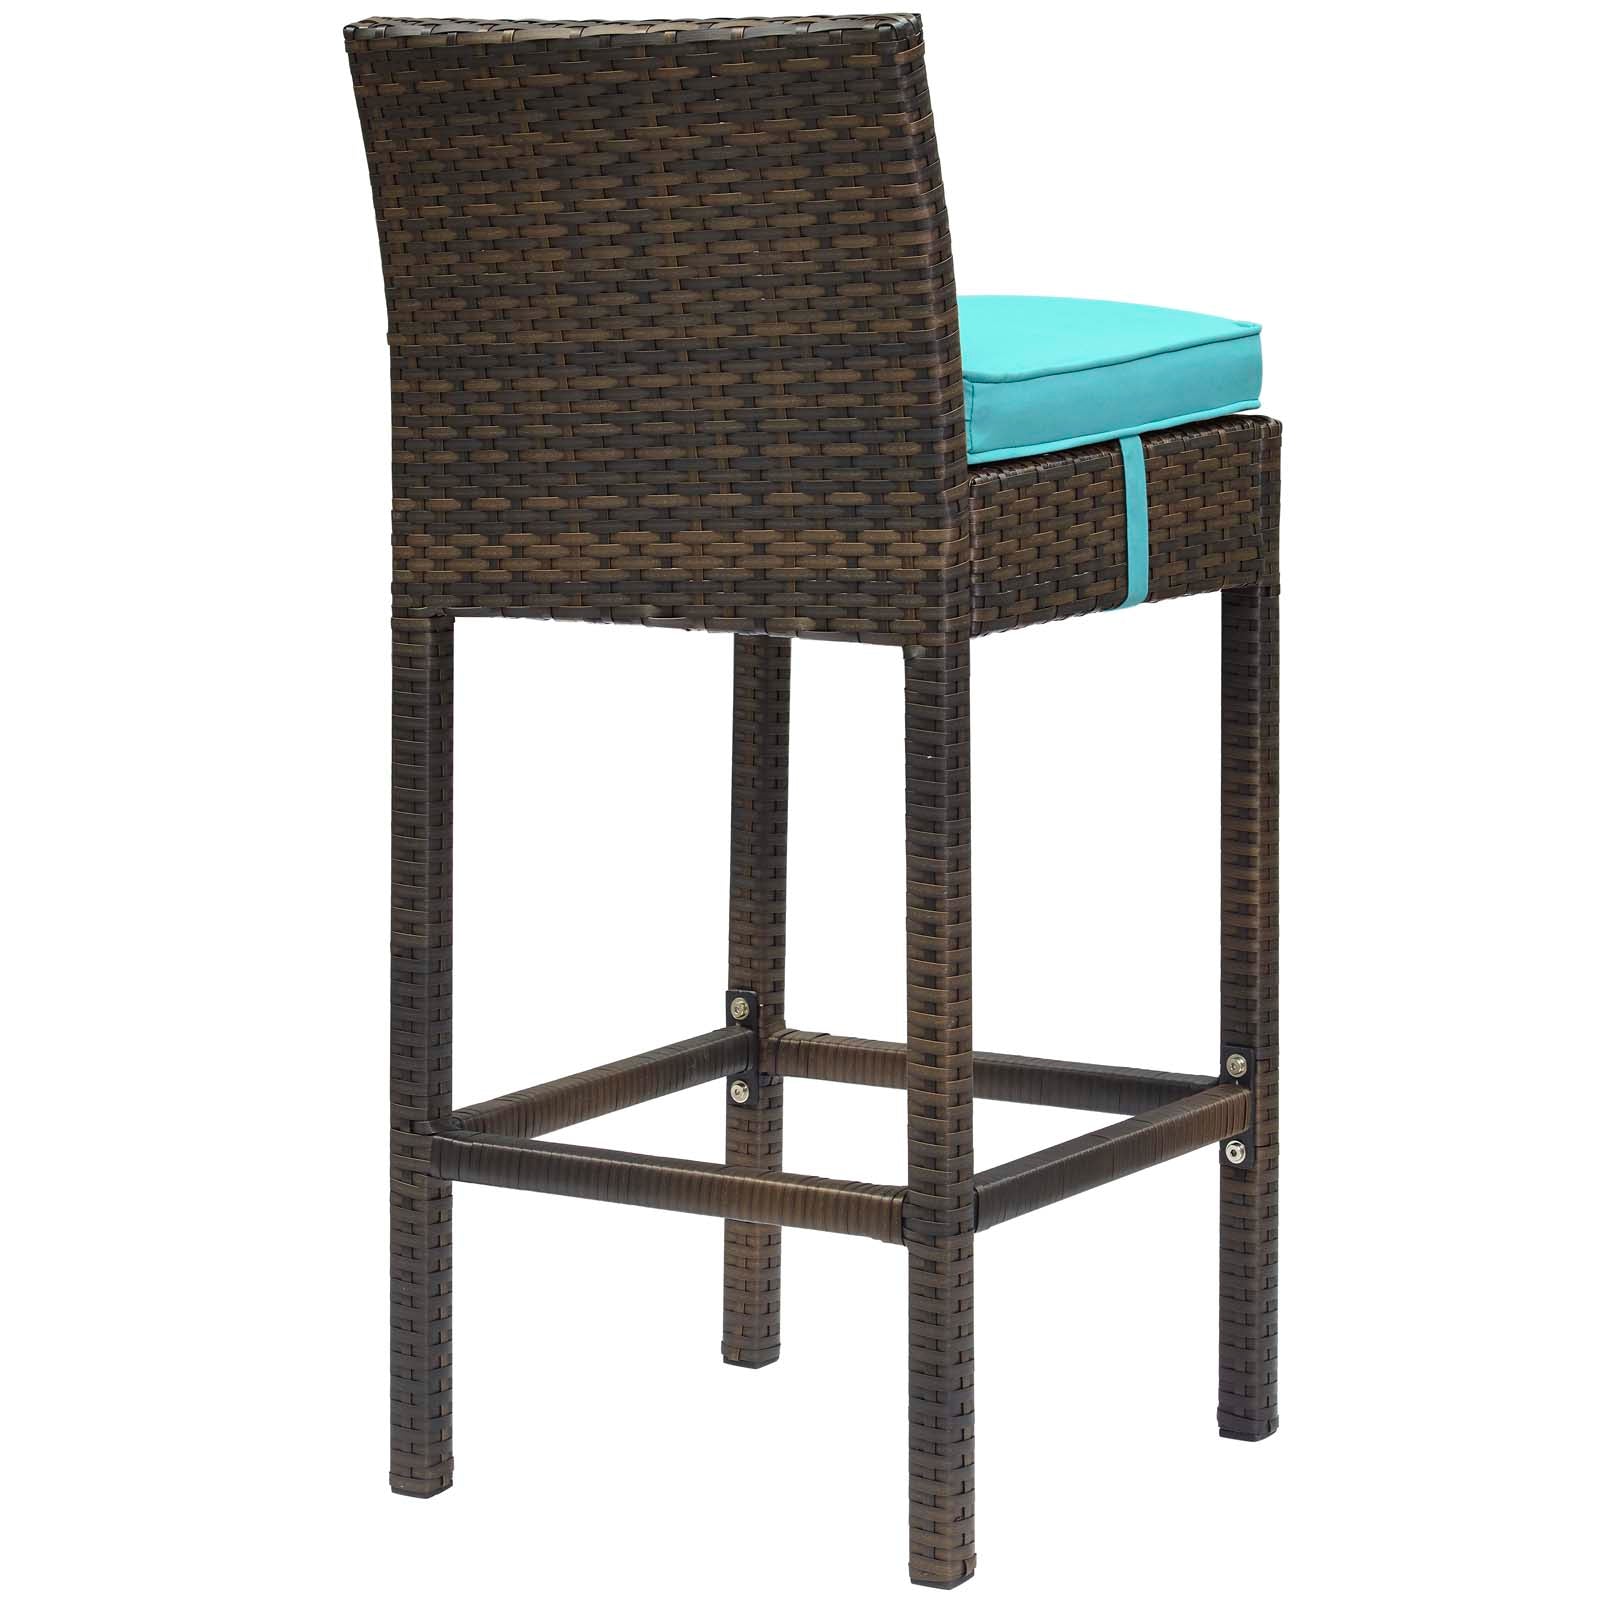 Modway Outdoor Barstools - Conduit Outdoor Patio Wicker Rattan Bar Stool Brown Turquoise